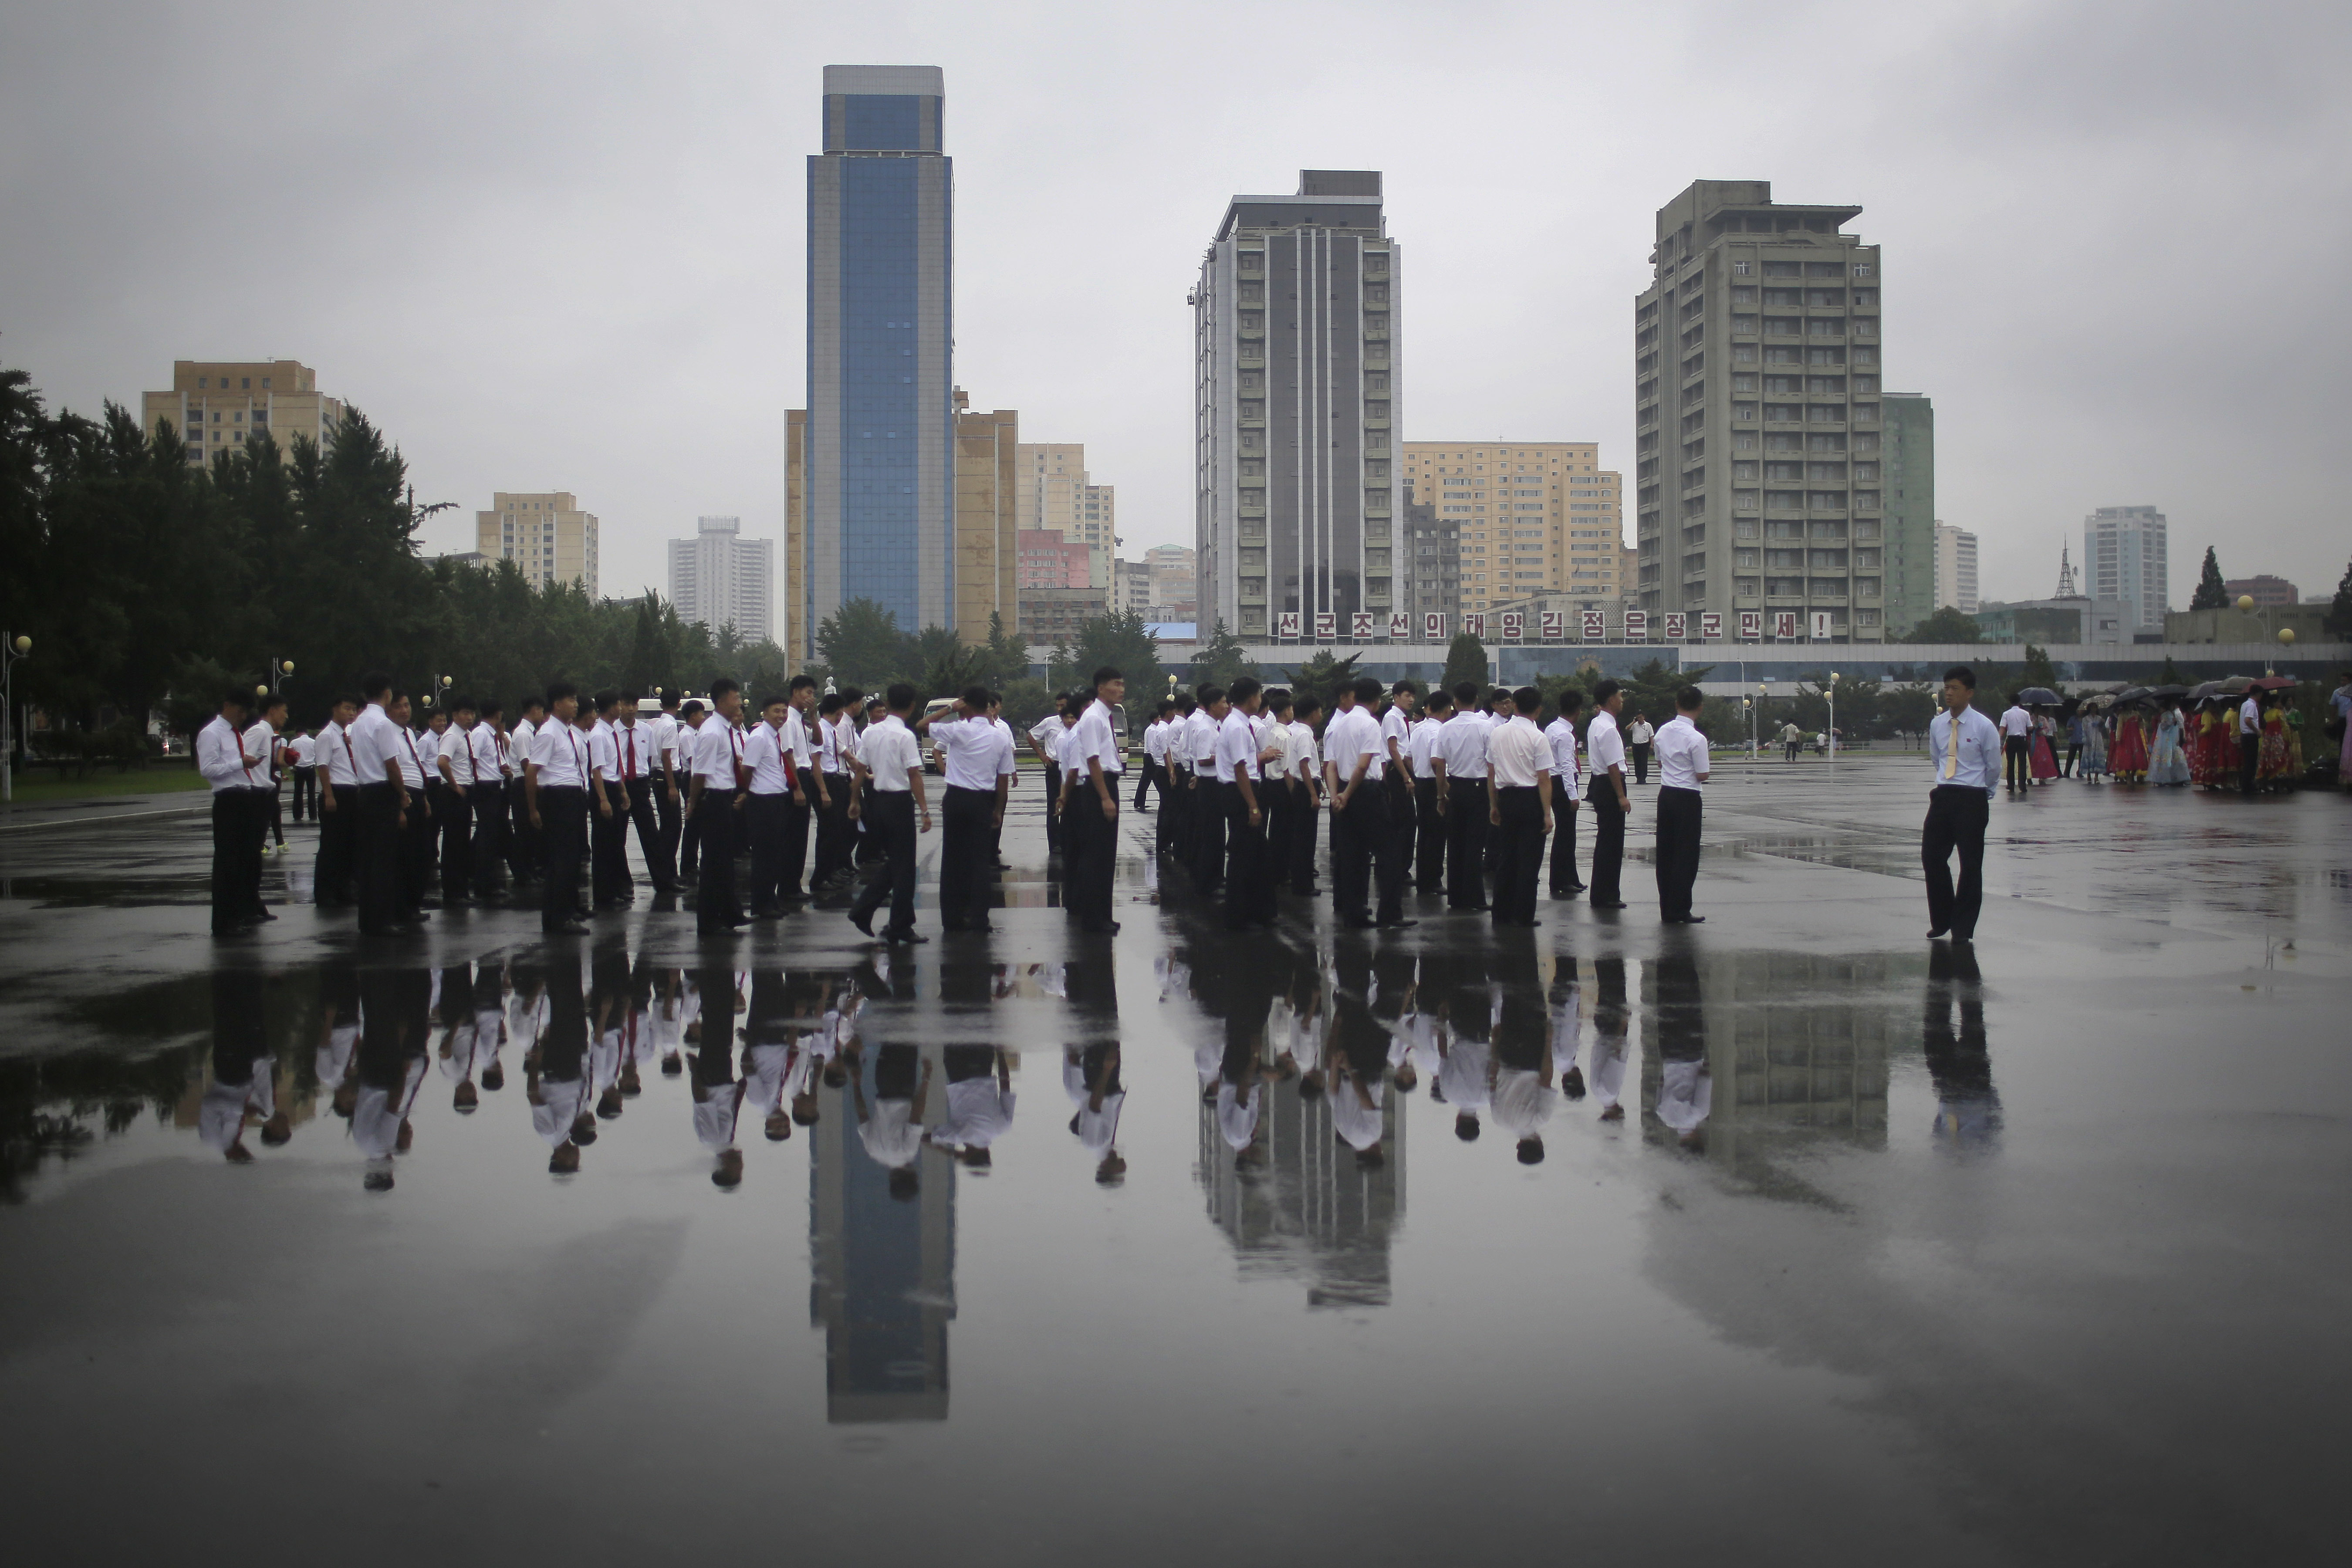 North Korean university students in their uniform are seen reflected in a rain puddle as they wait for the start of a mass dance on Thursday, July 27, 2017, in Pyongyang, North Korea as part of celebrations for the 64th anniversary of the armistice that ended the Korean War. (AP Photo/Wong Maye-E)